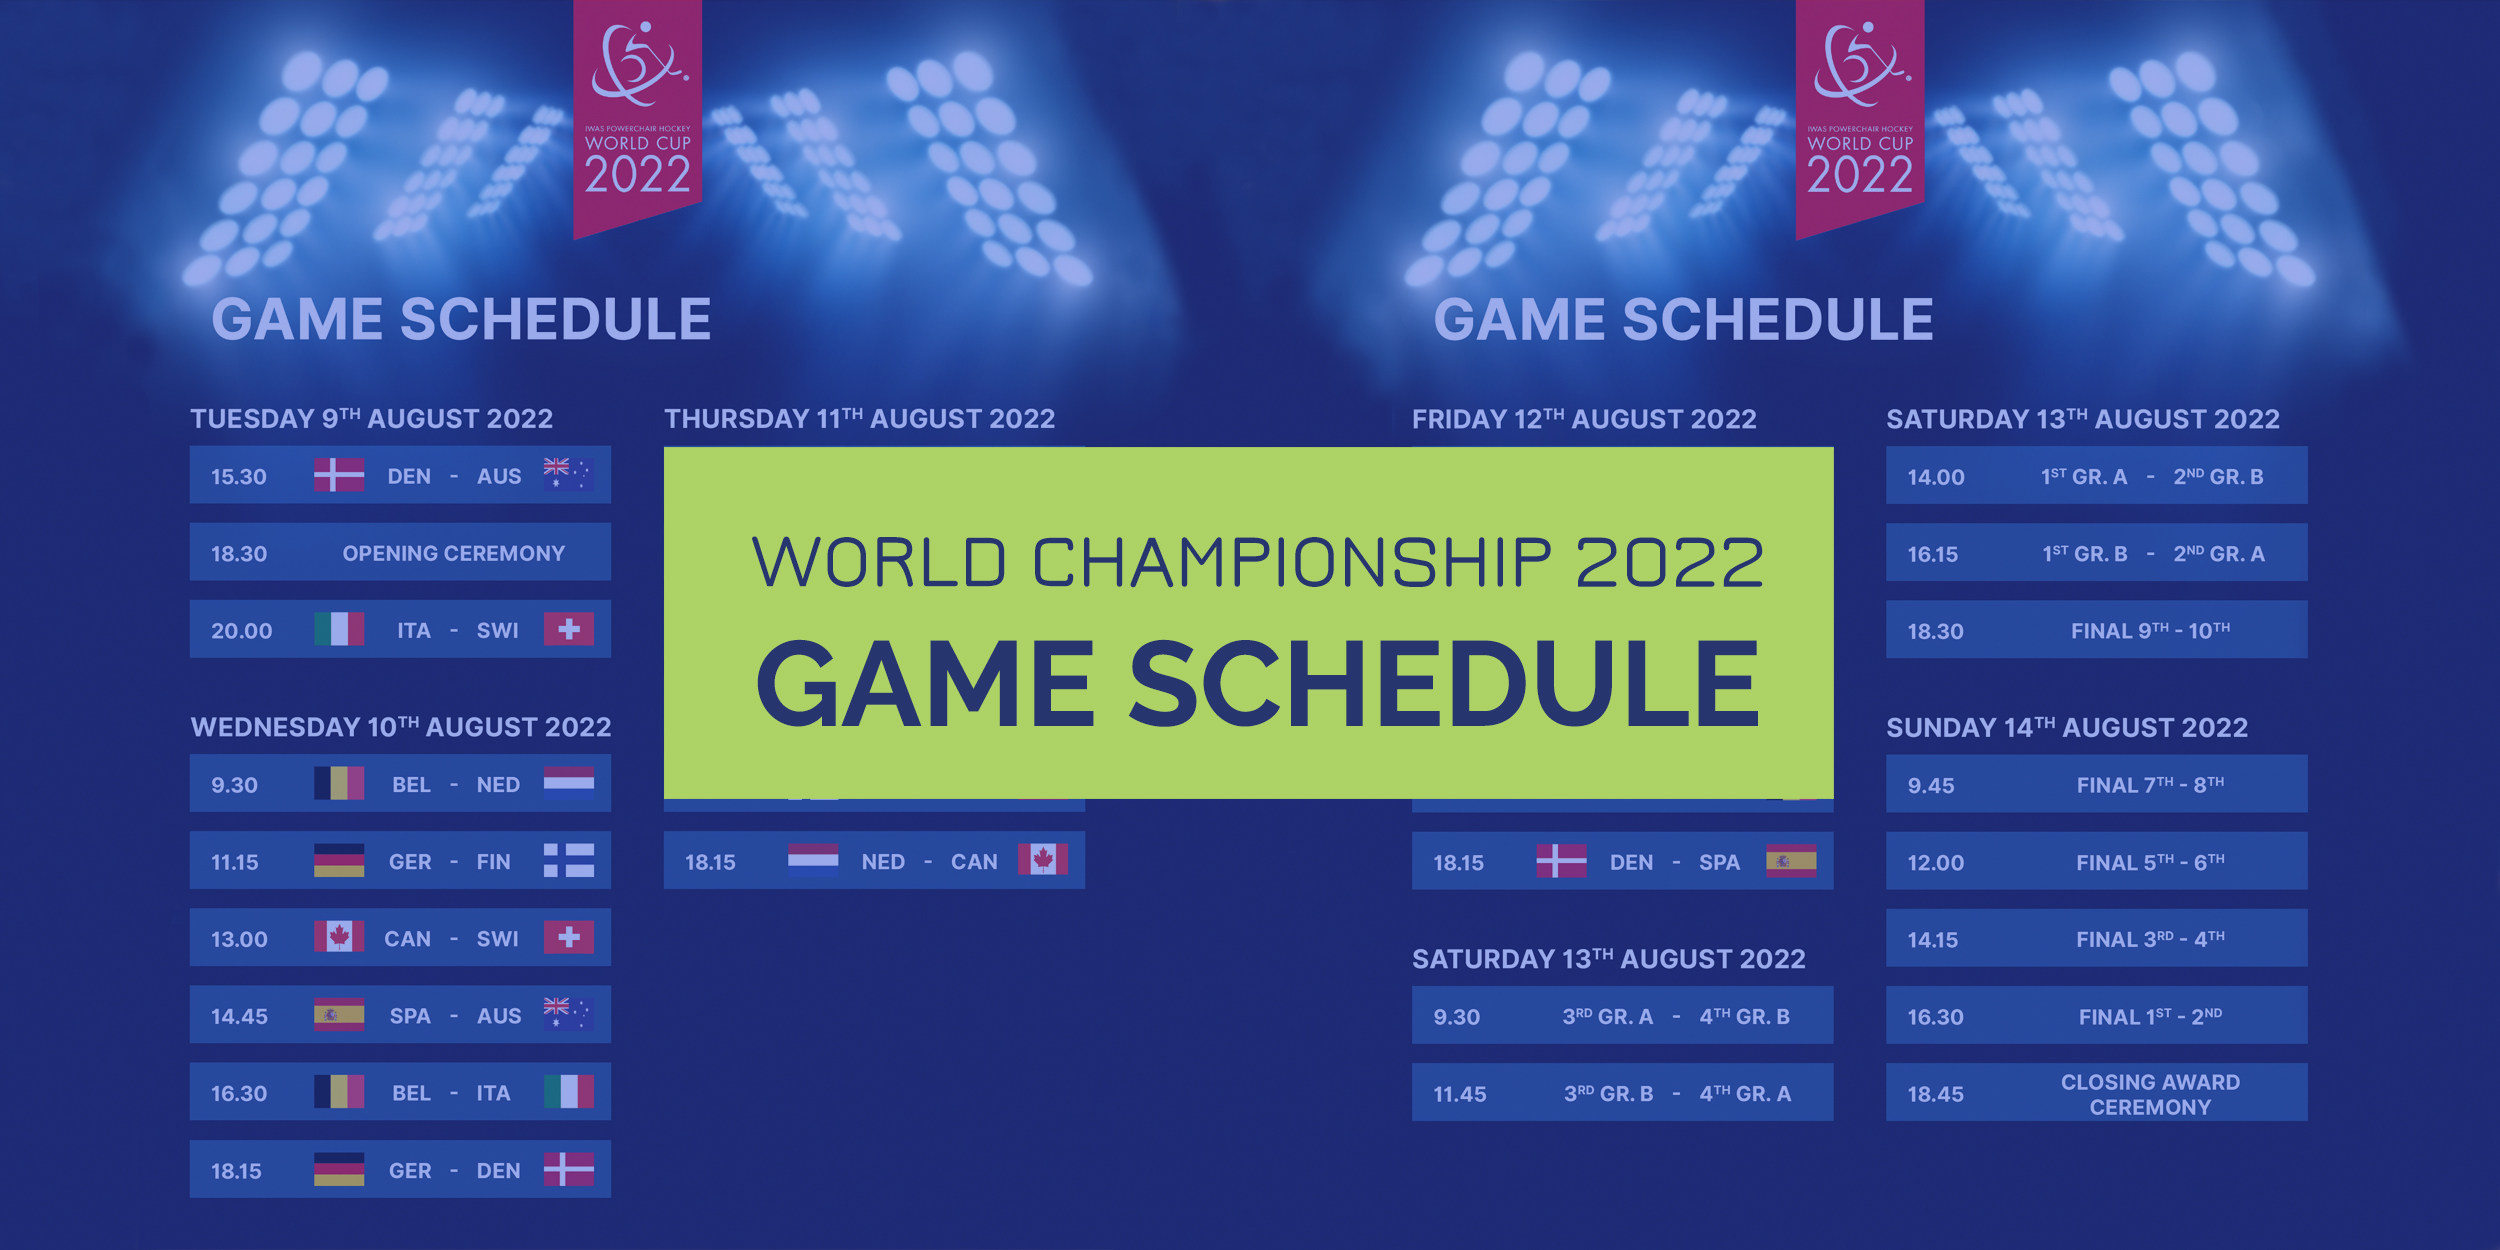 Game schedule announced for the IPCH World Championship 2022 in Sursee